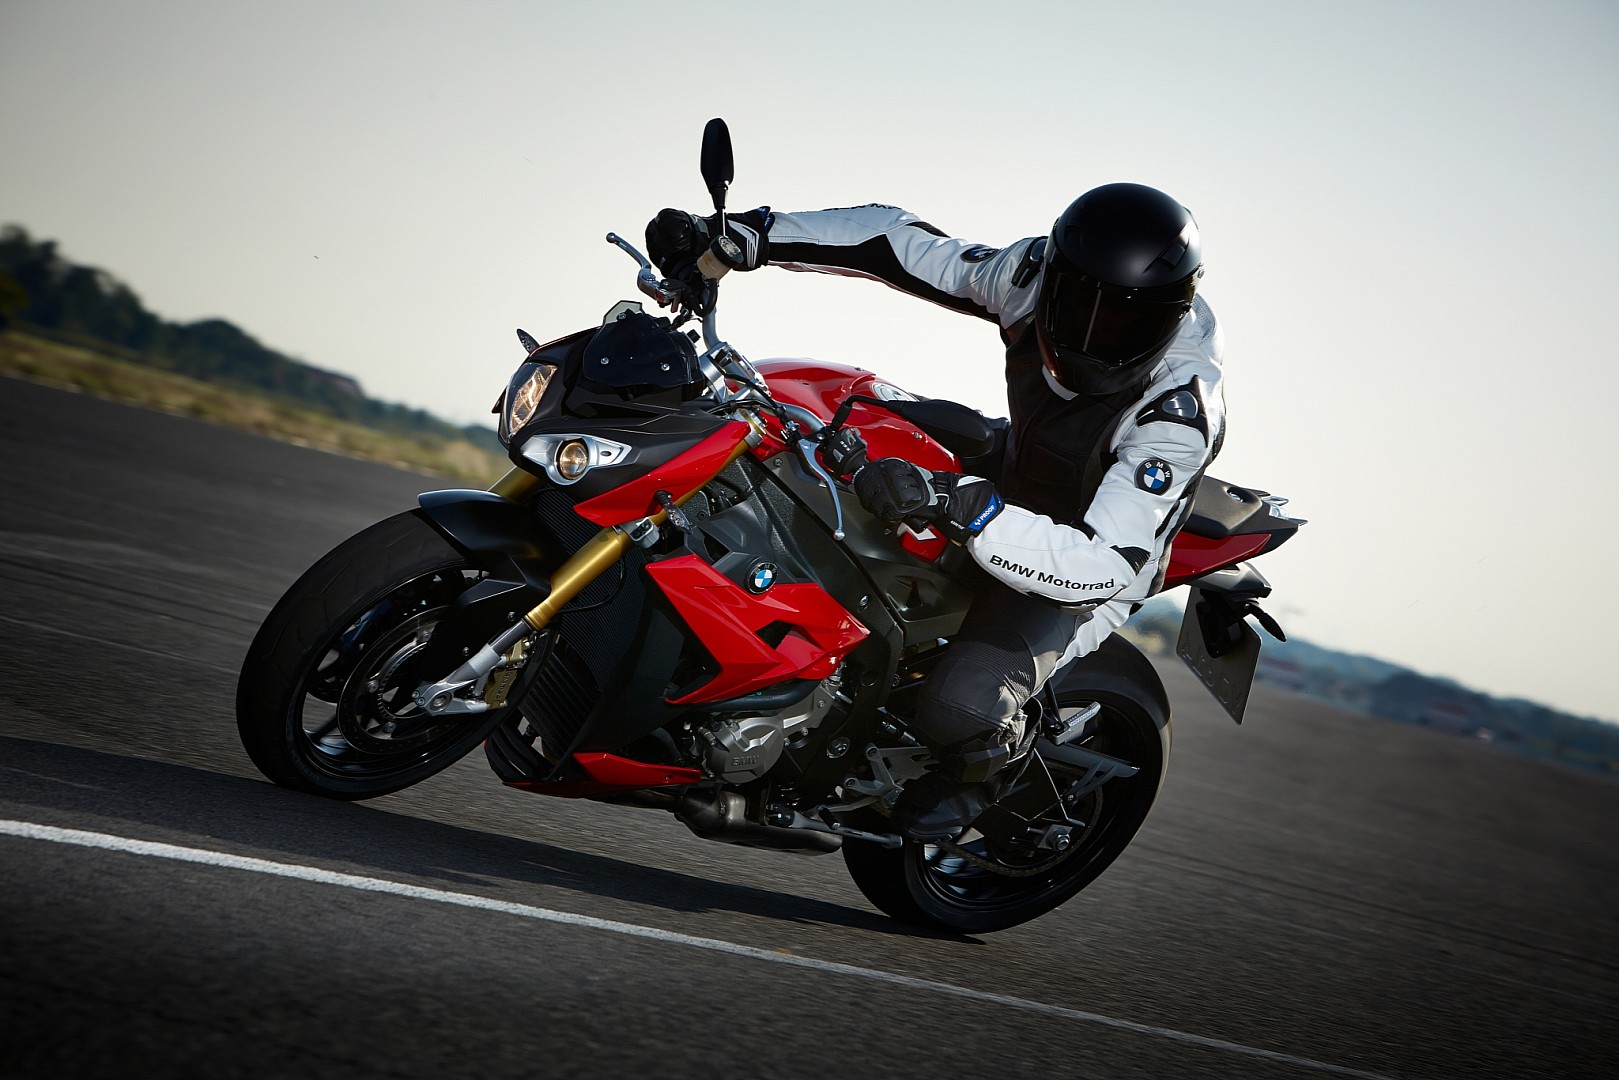 2014-bmw-s1000r-even-more-evil-than-the-rr-photo-gallery-1080p-3.jpg